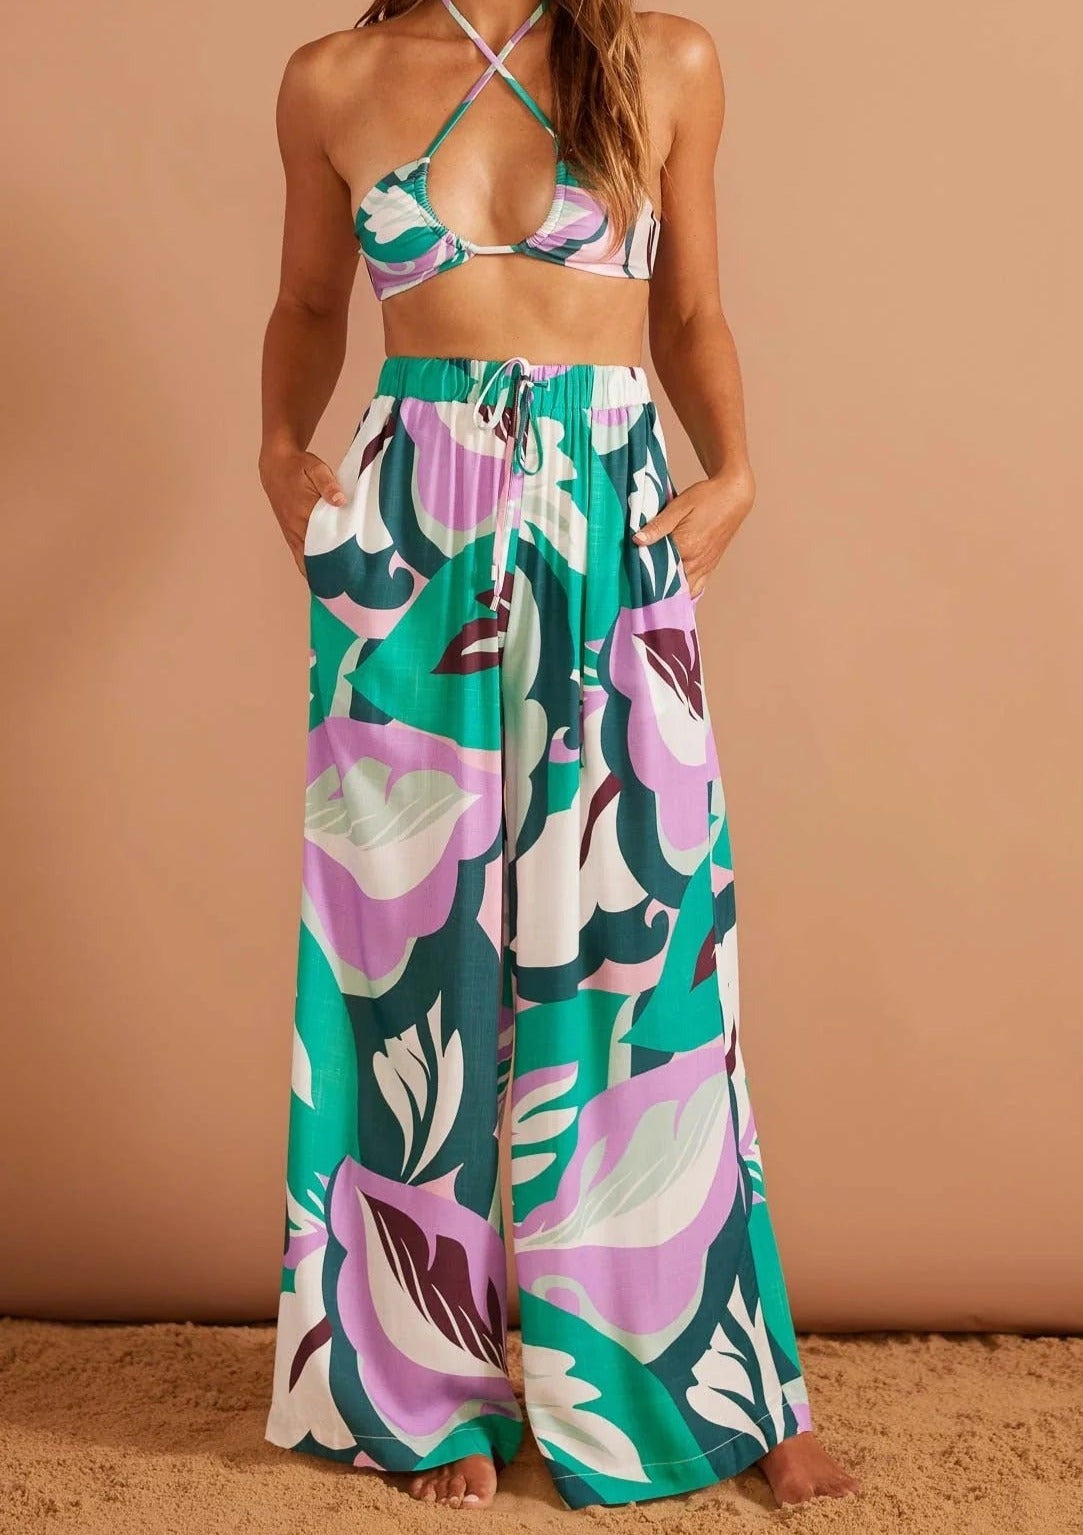 Brisa Marina Pant - Lilac/Green, by MinkPink Details:  - Wide-leg drawstring pants in exclusive abstract palm print - High waisted with side pockets. - Encased elastic waistband with self-fabric drawstring - Pair back with Brisa Marina Shirt. - Designed in Sydney, Australia